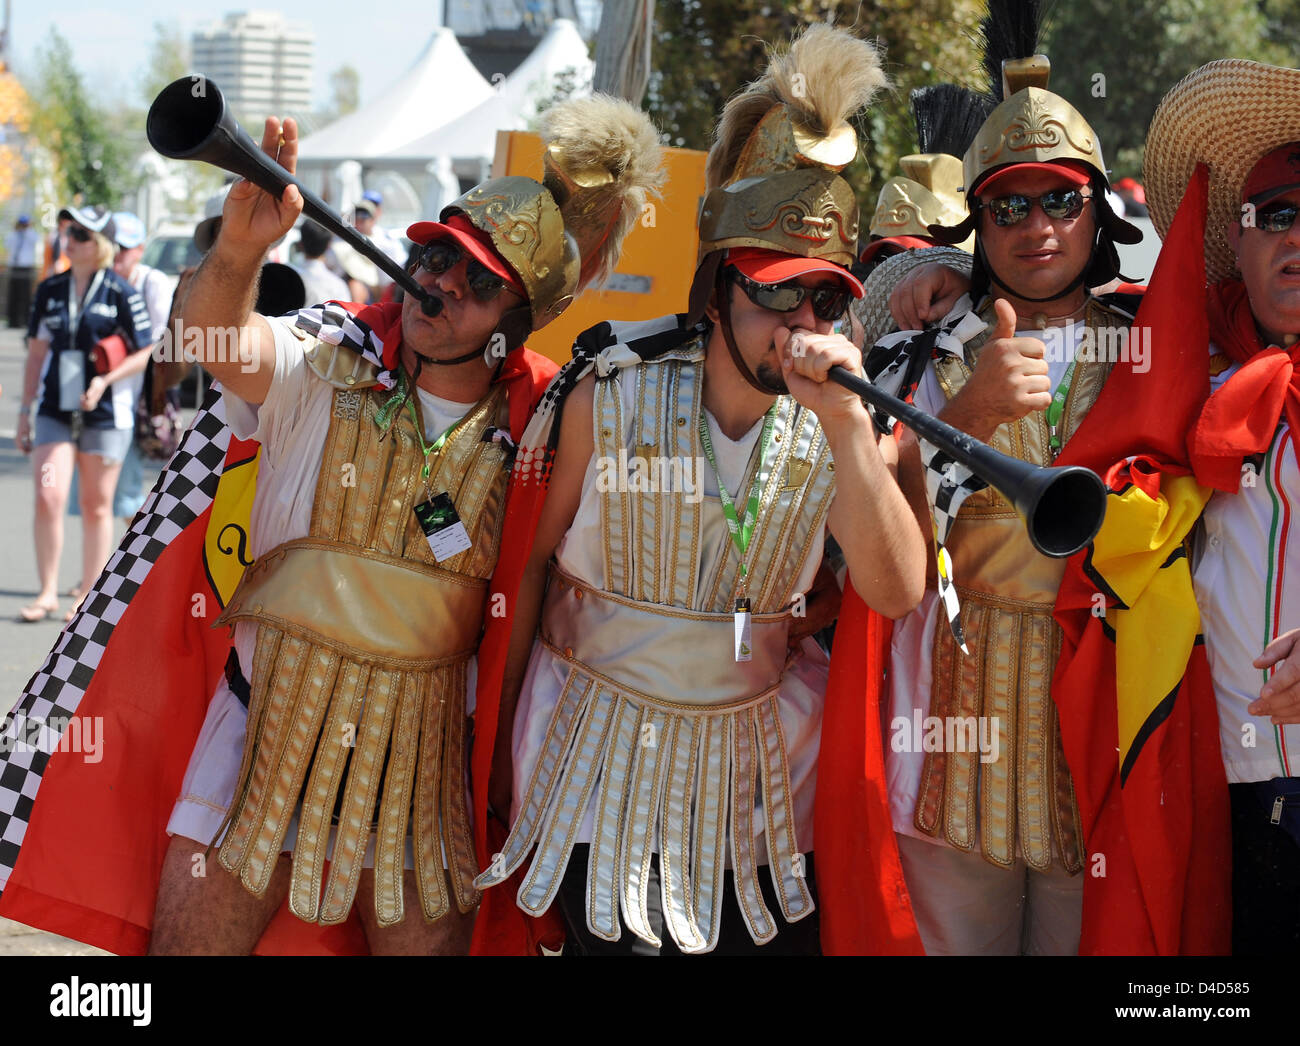 A group of Ferrari fans costumed as Romans on their way to Albert Park circuit in Melbourne, Australia, 16 March 2008. Hamilton homed a pole-to-flag victory in an action-packed and crash-strewn Australian GP. Photo: Gero Breloer Stock Photo